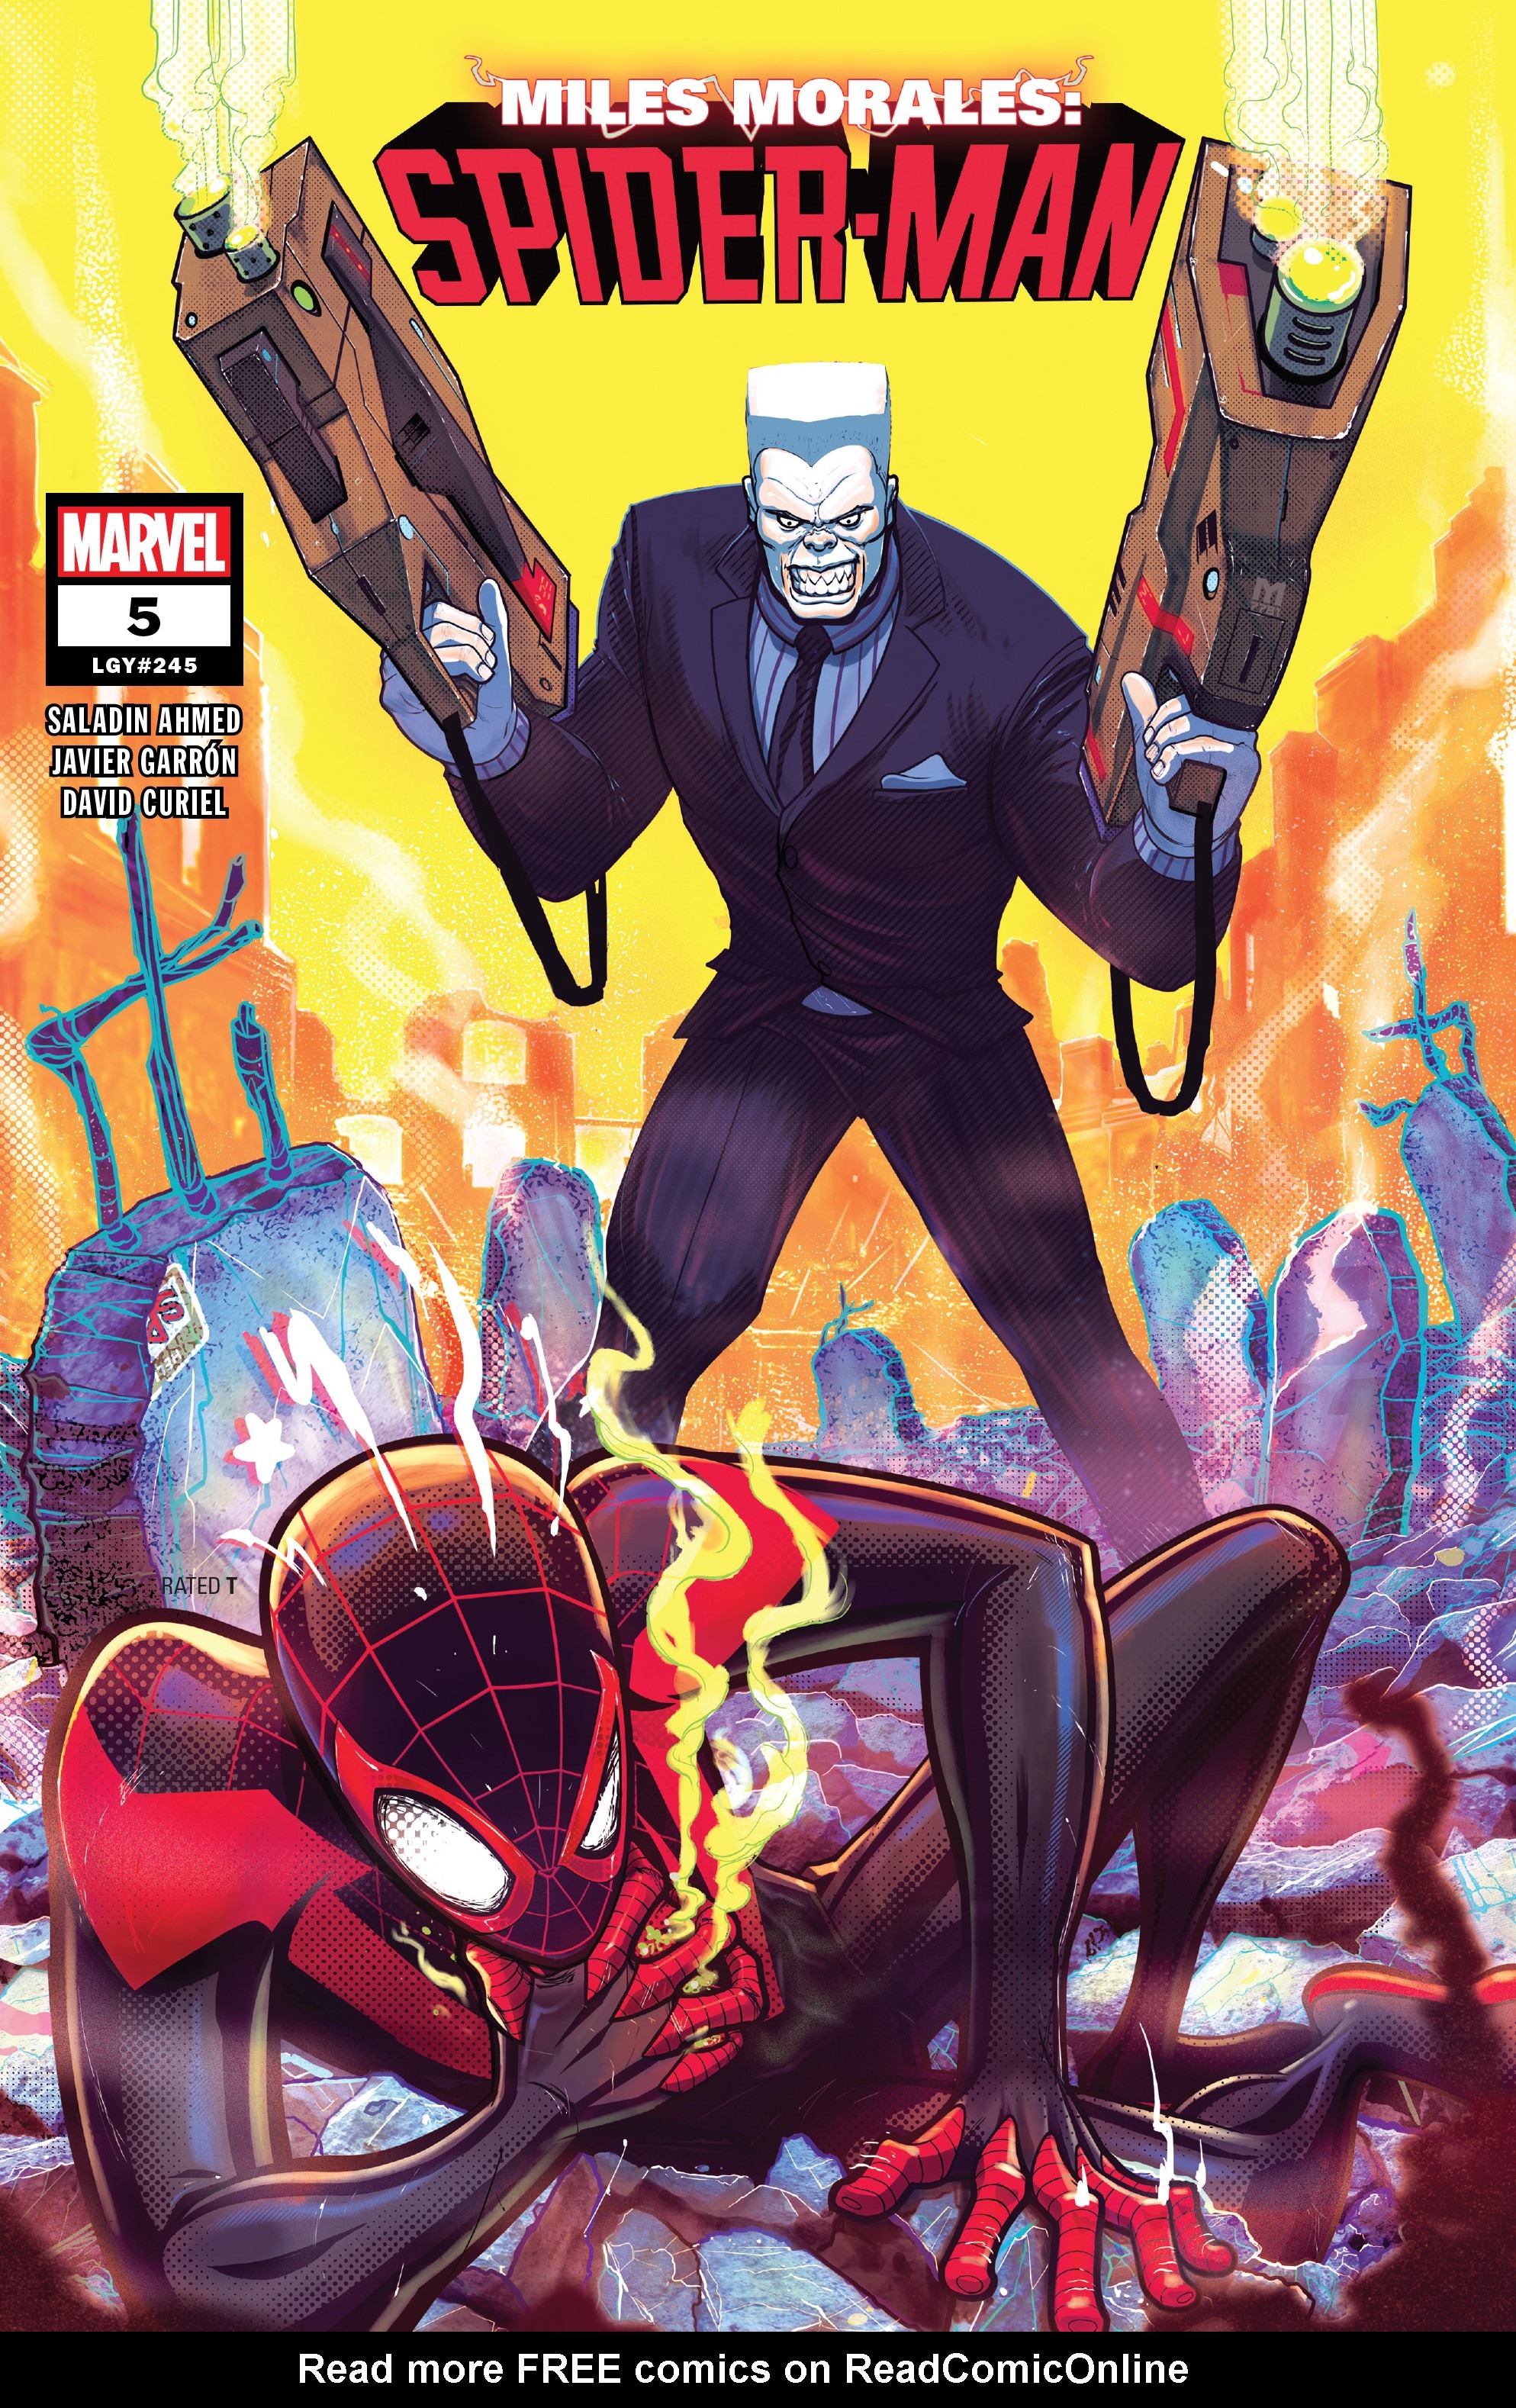 Read online Miles Morales: Spider-Man comic -  Issue #5 - 1